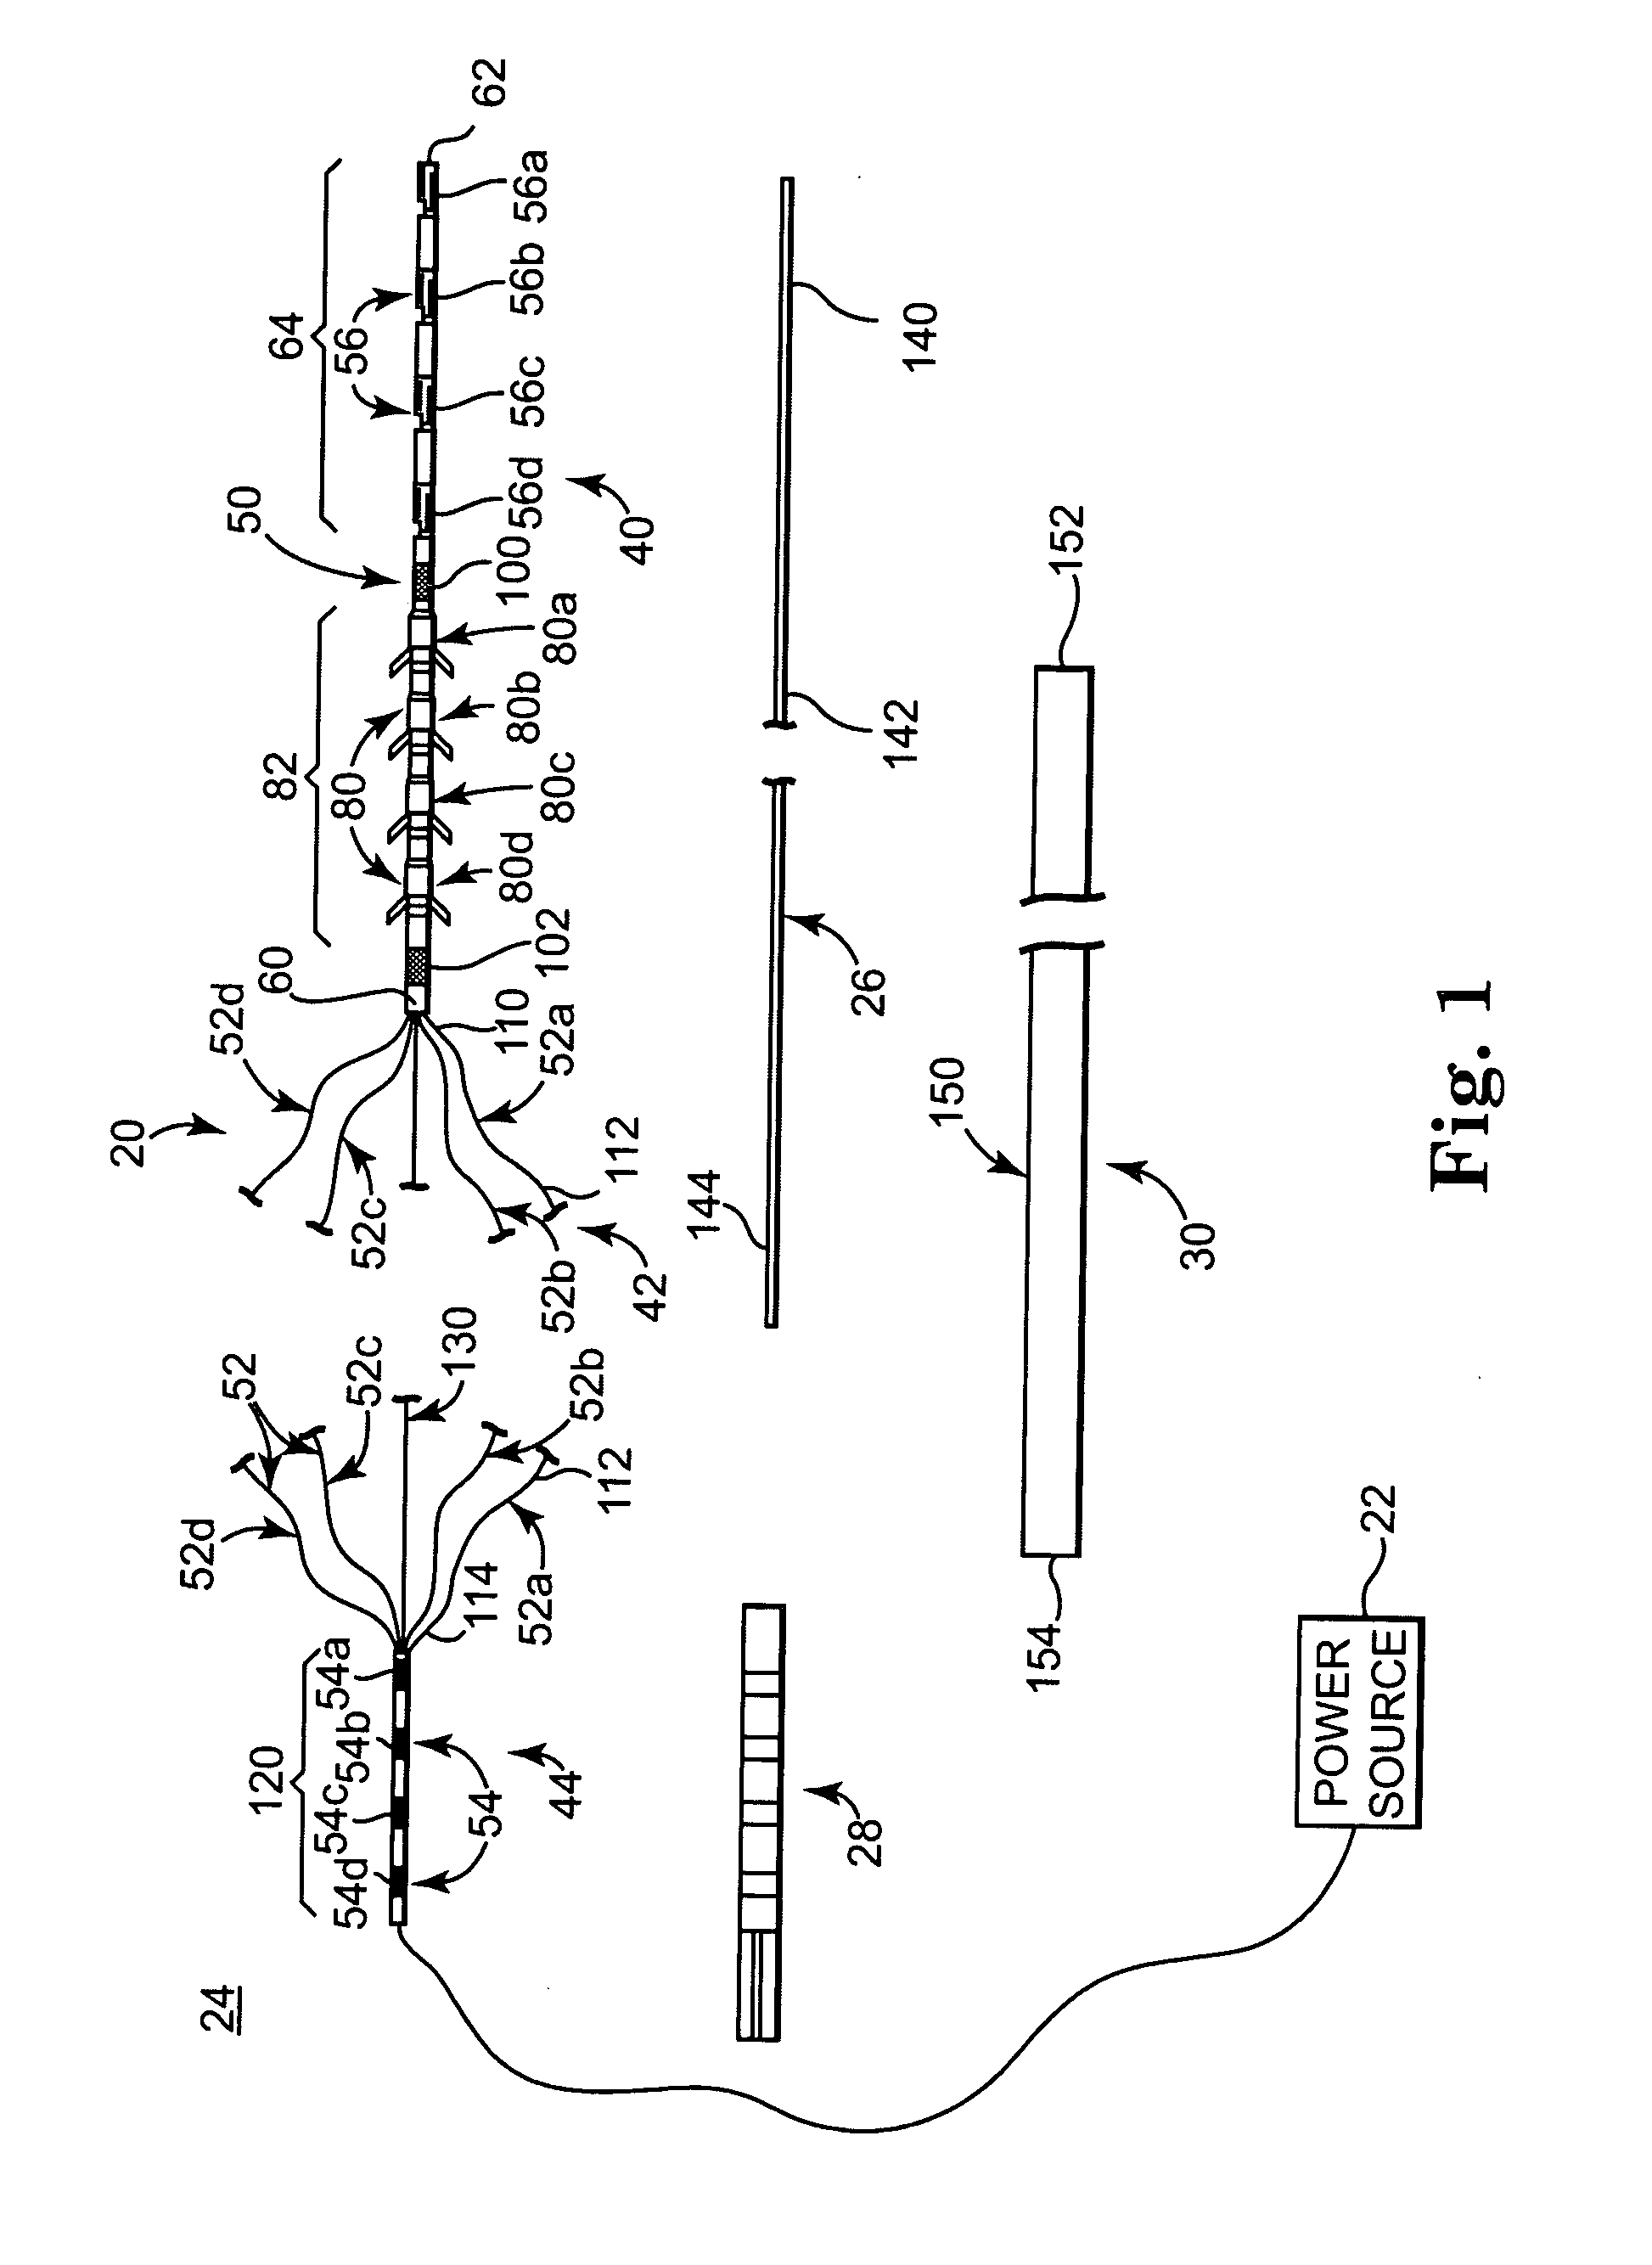 Multi-electrode peripheral nerve evaluation lead and related system and method of use